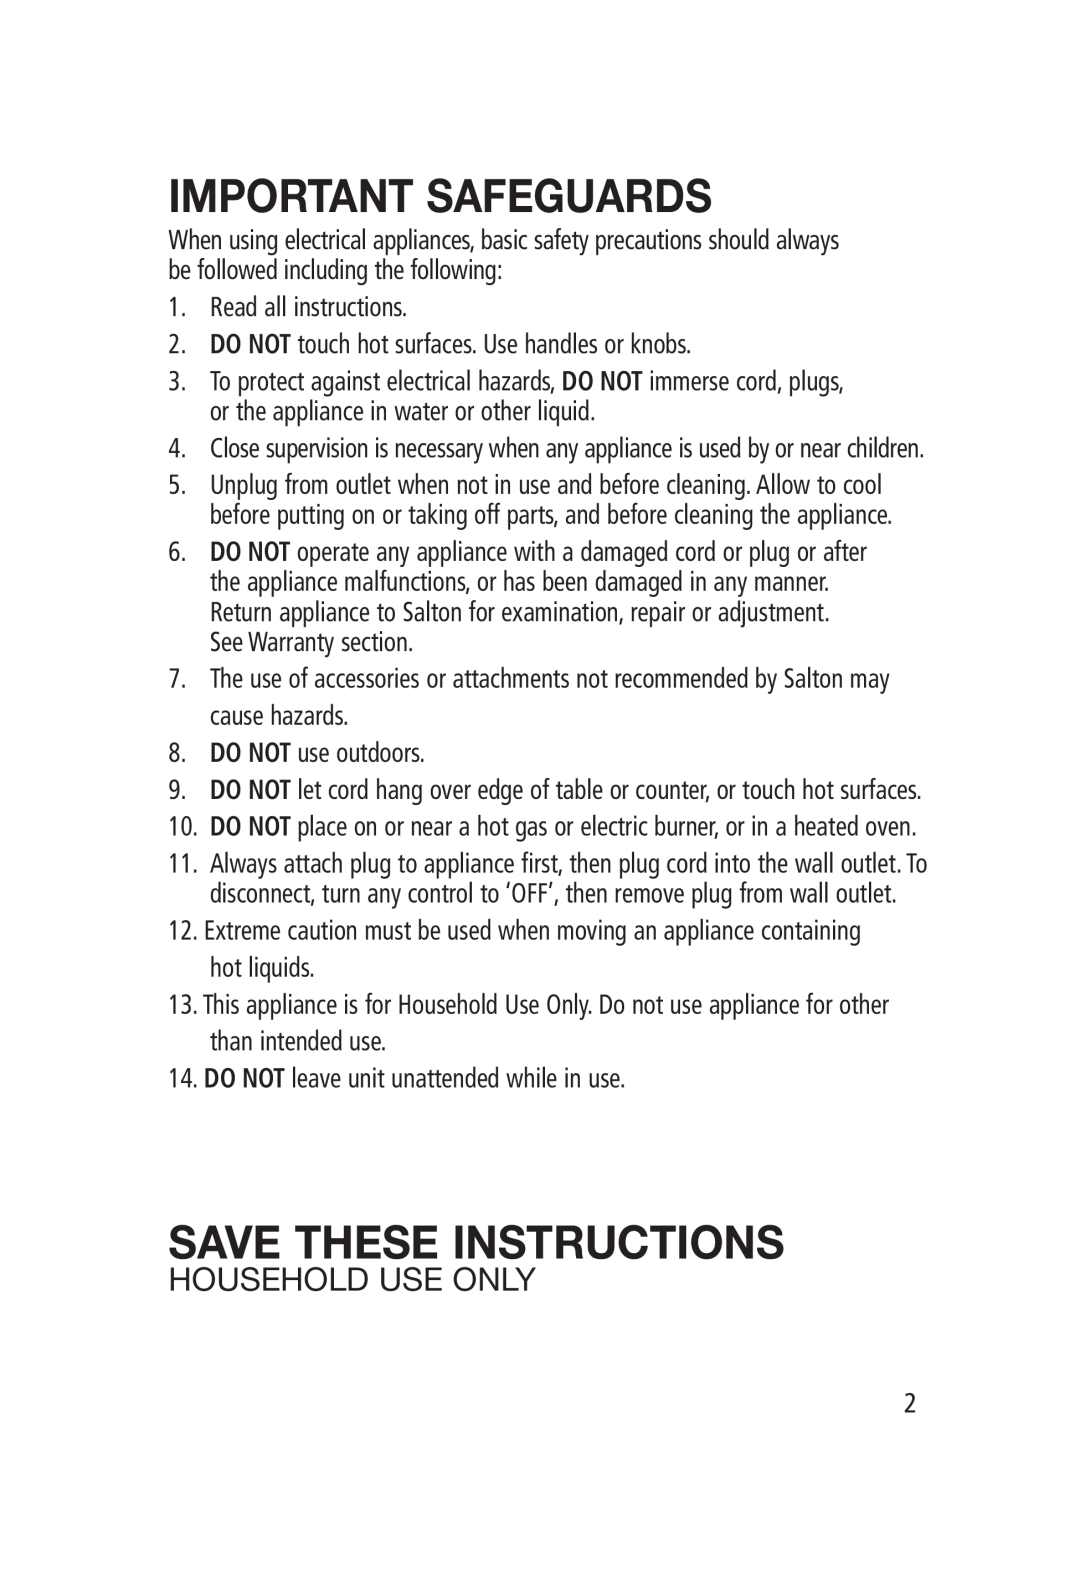 Salton FC-1205 manual Household Use Only, Important Safeguards, Save These Instructions, Read all instructions, hot liquids 